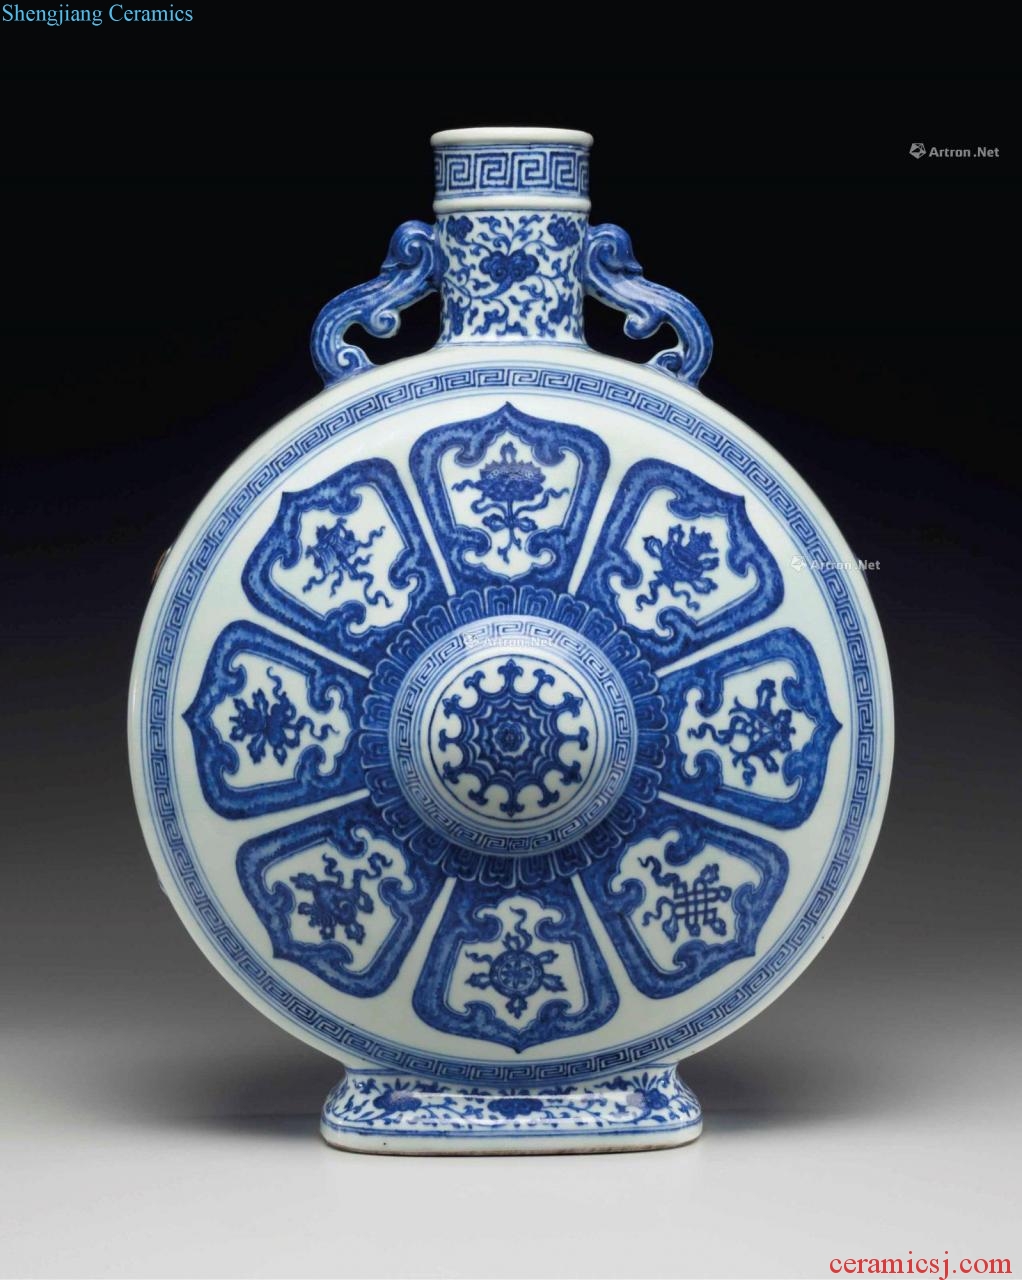 Qianlong period (1736-1795), A LARGE MING - STYLE BLUE AND WHITE MOONFLASK